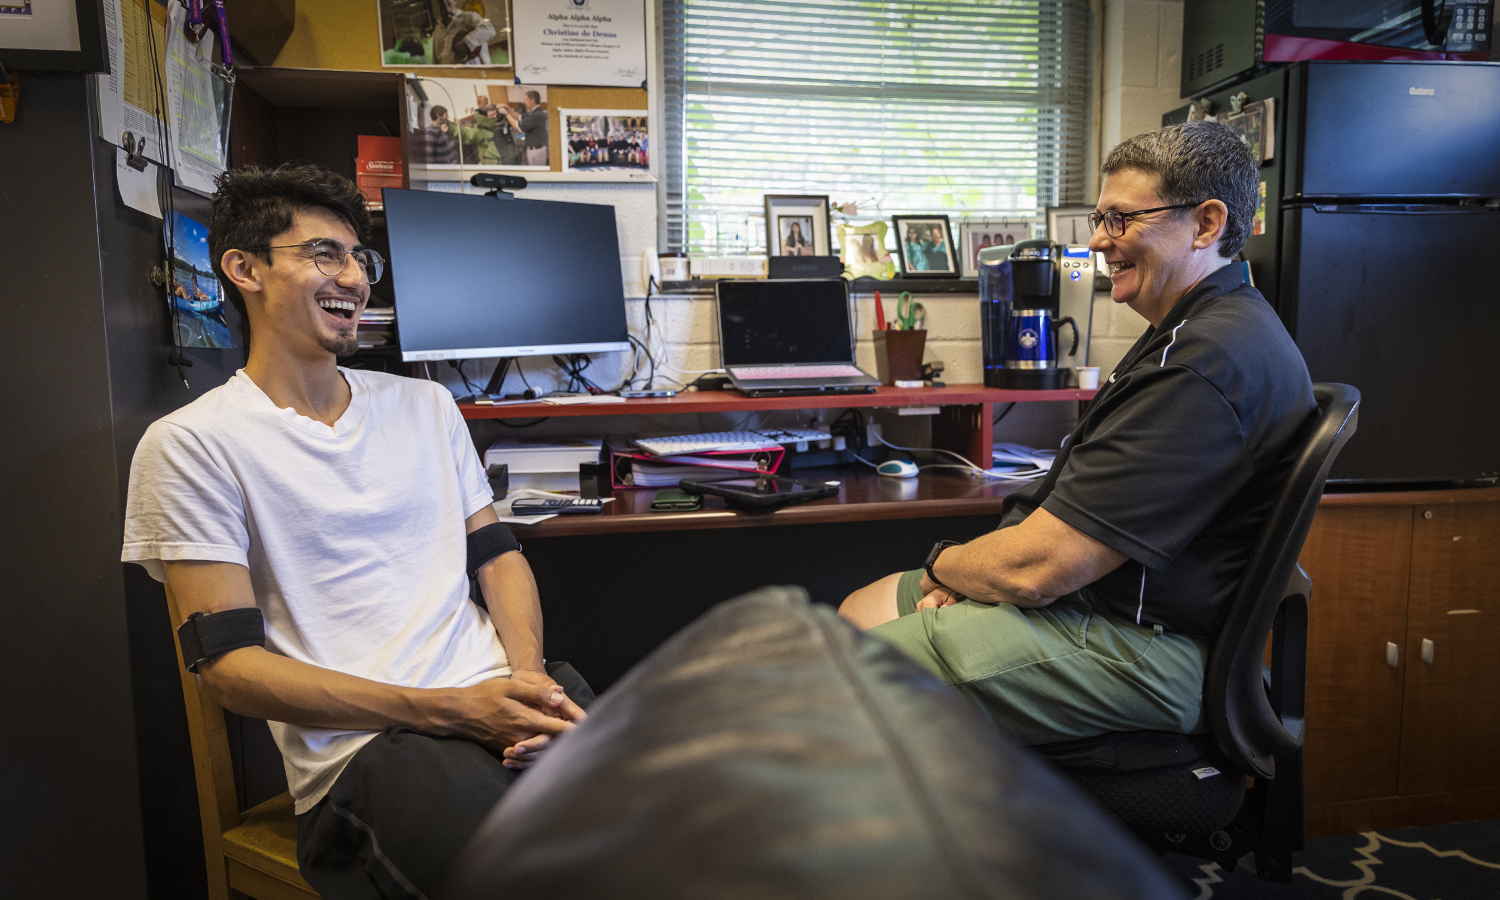 In This Week in Photos, we explore the relationships and personal connections that set the HWS community apart. Here, Will Argueta ’24 enjoys catching up with Associate Professor of Chemistry Christine de Denus.